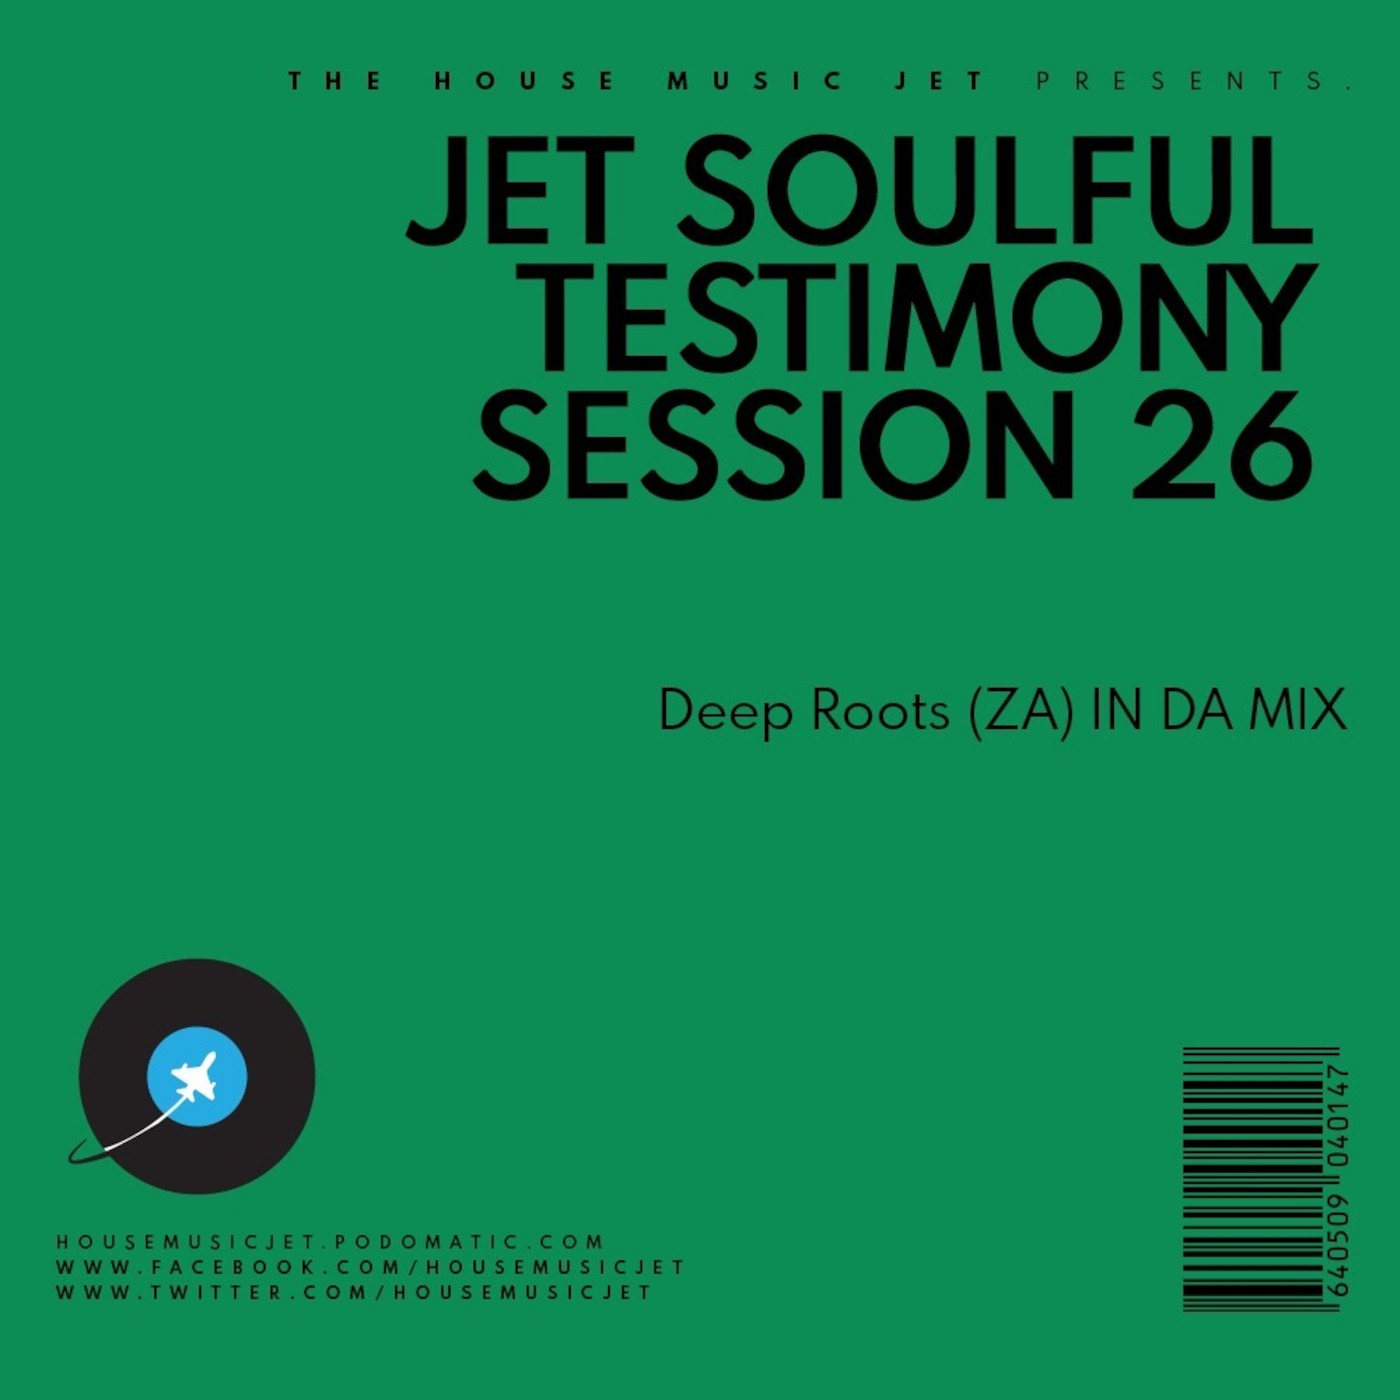 Deep Roots (ZA) In Da Mix - The Jet Soulful Testimony Session 26